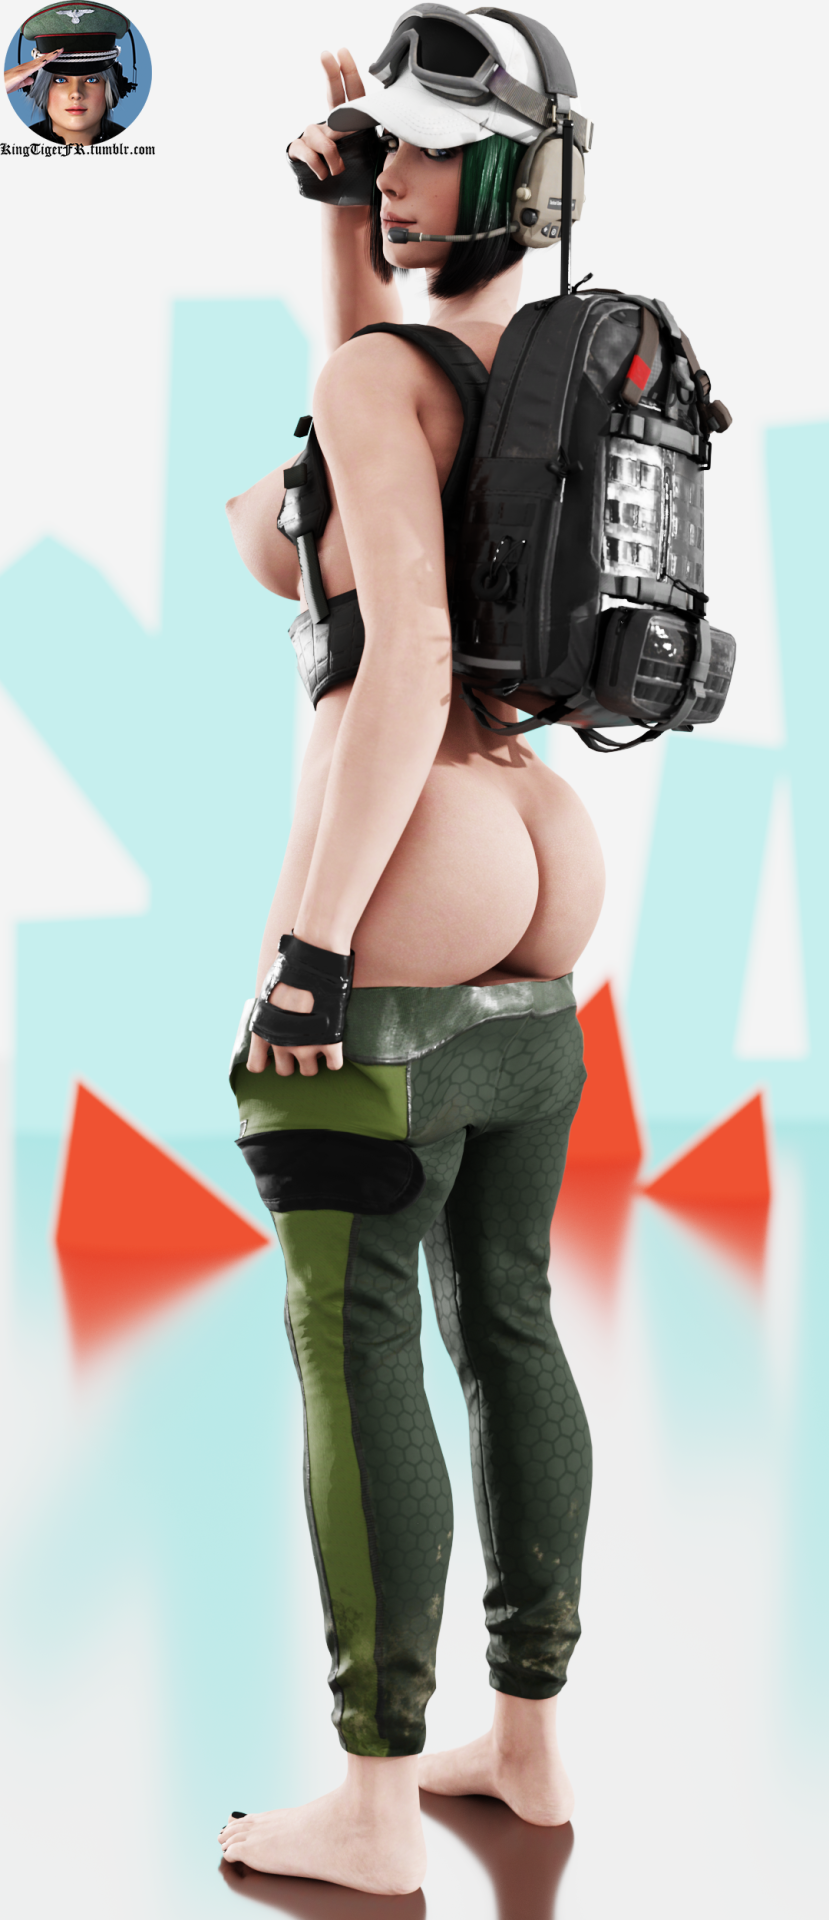 kingtigerfr:  Welcome Ela ‘-’Ela model is out since 1 week I get it and she